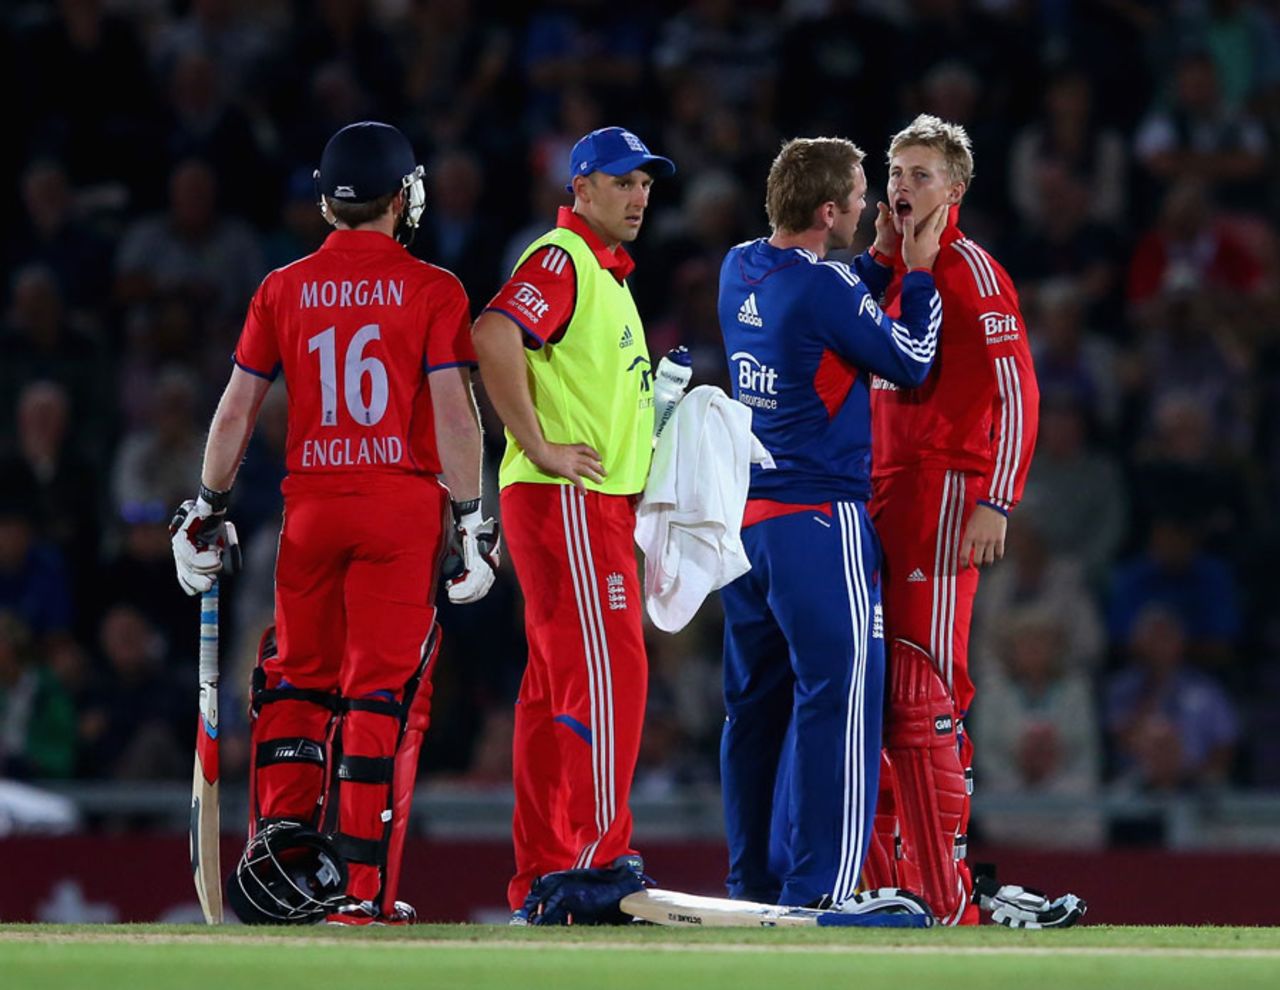 Joe Root needed treatment after being struck in the face, England v Australia, 1st T20, Ageas Bowl, August 29, 2013